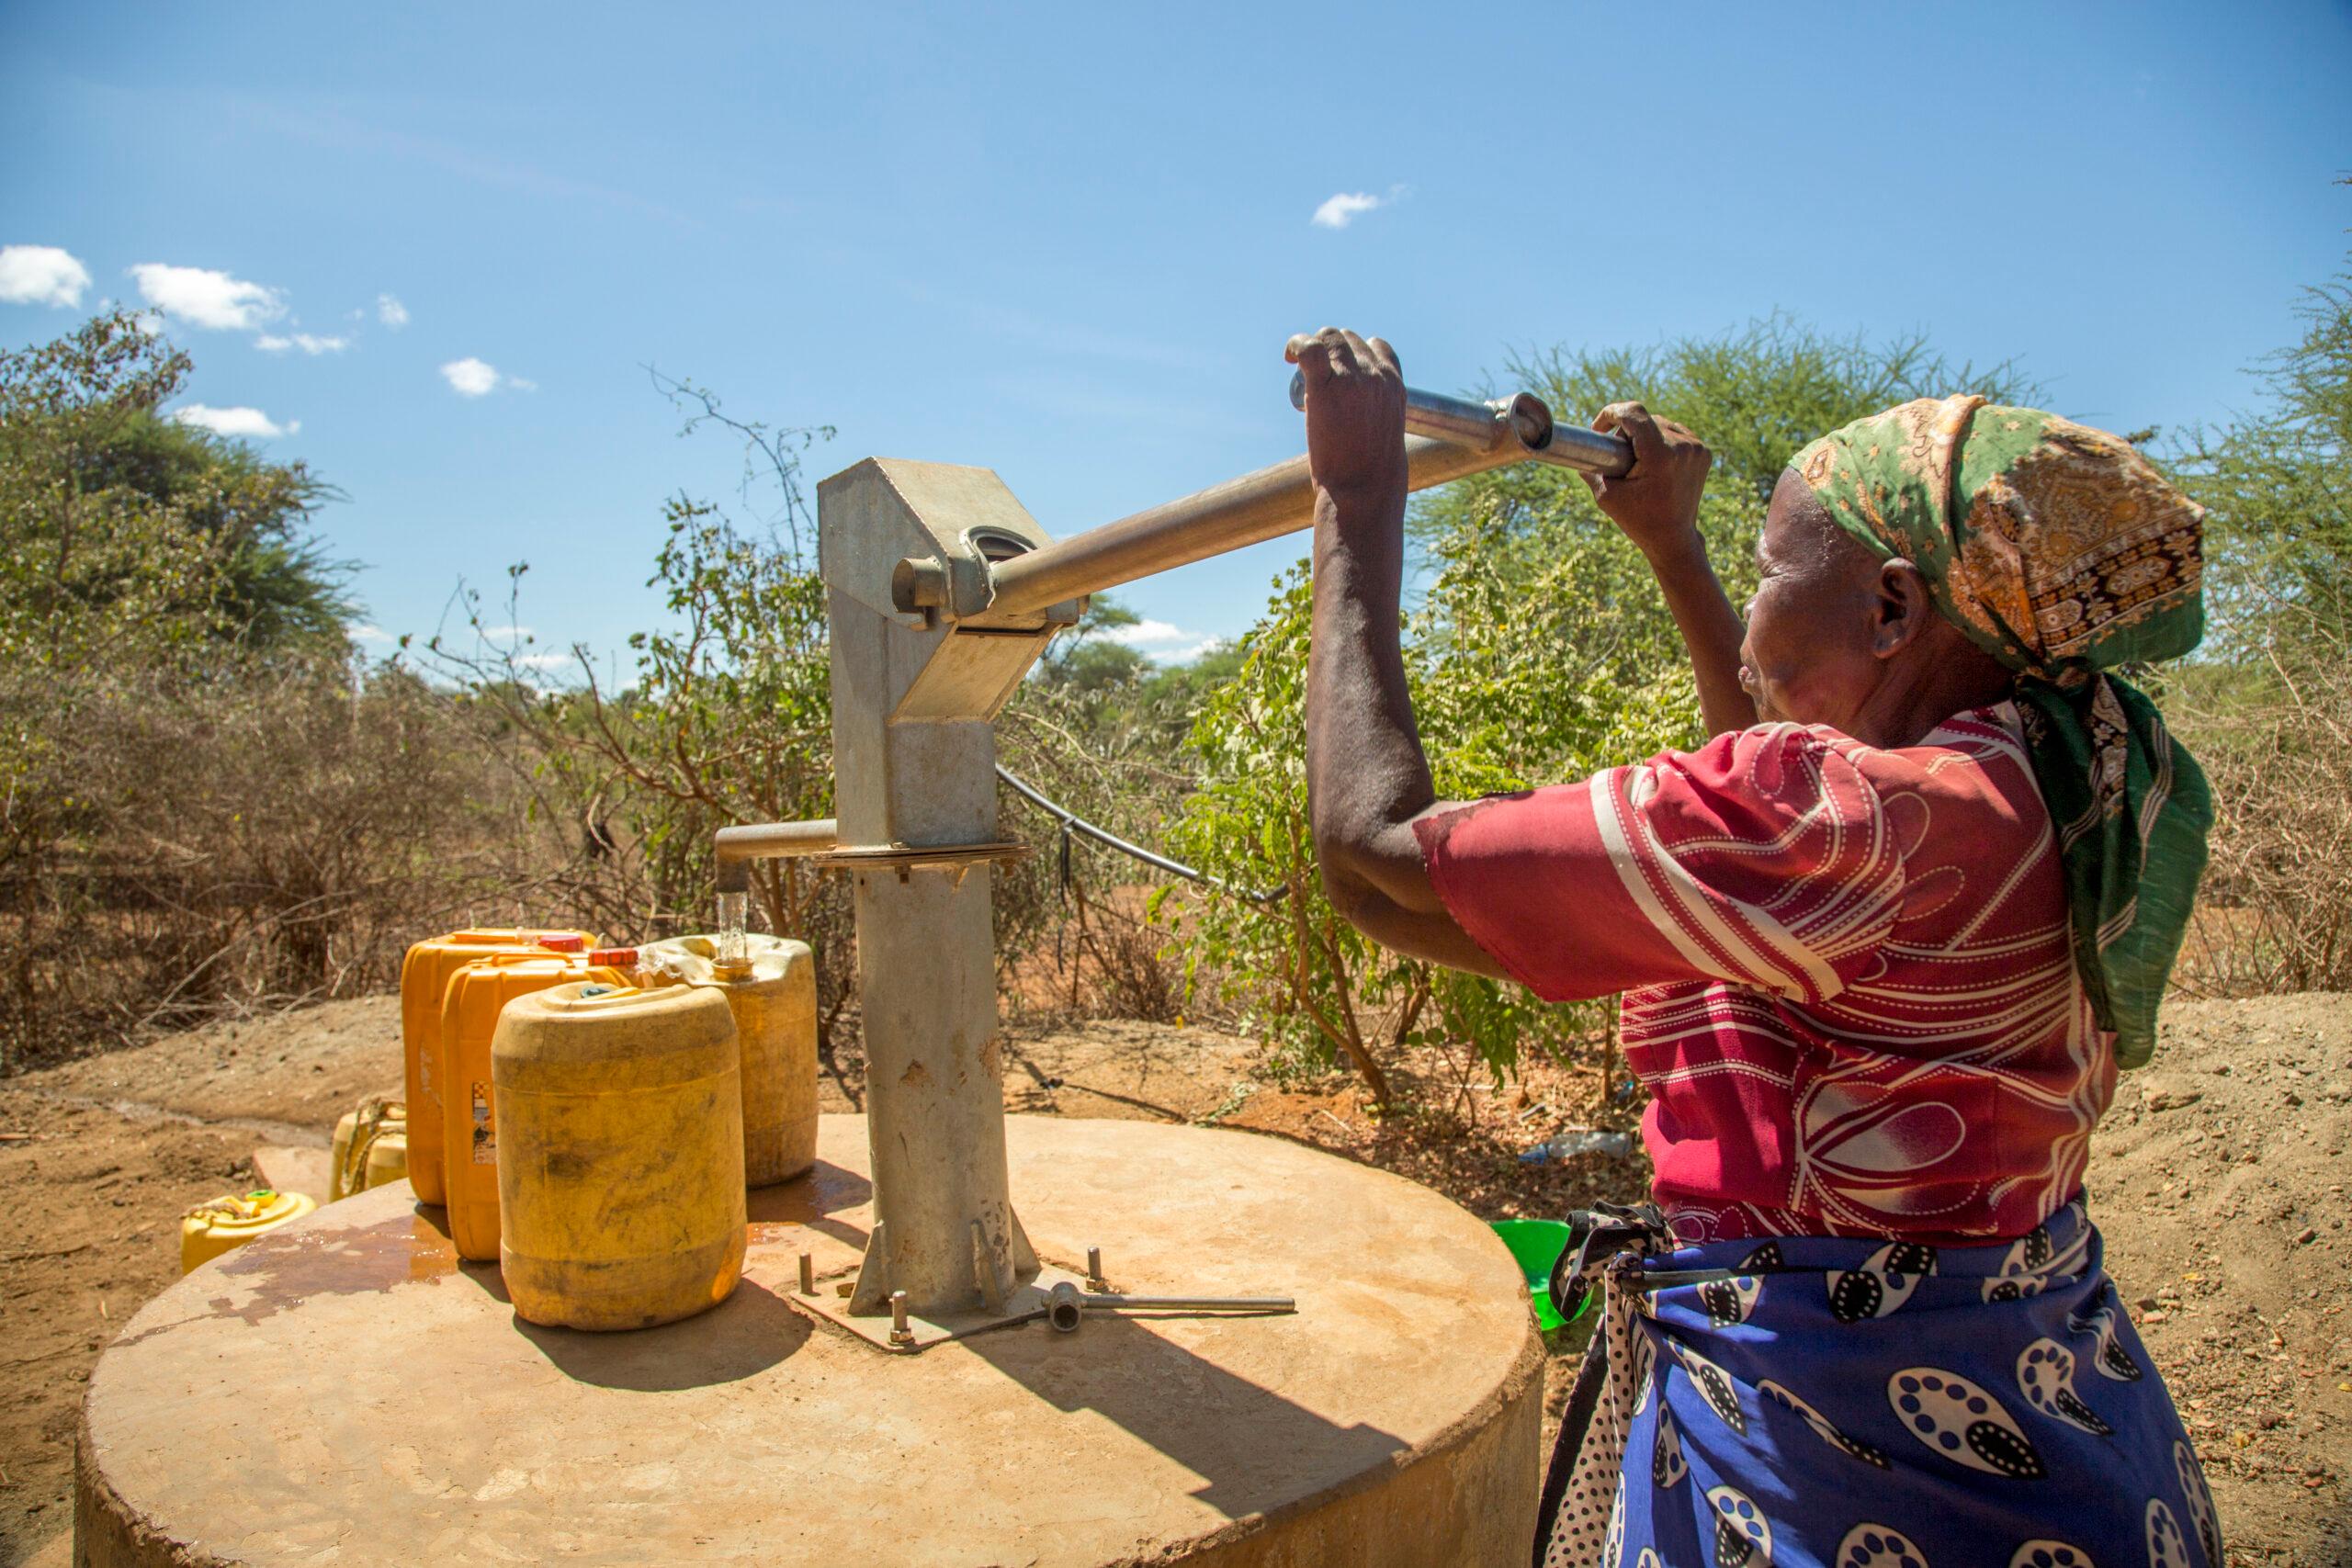 A woman in a rural landscape pumping water out of a well into plastic canisters.